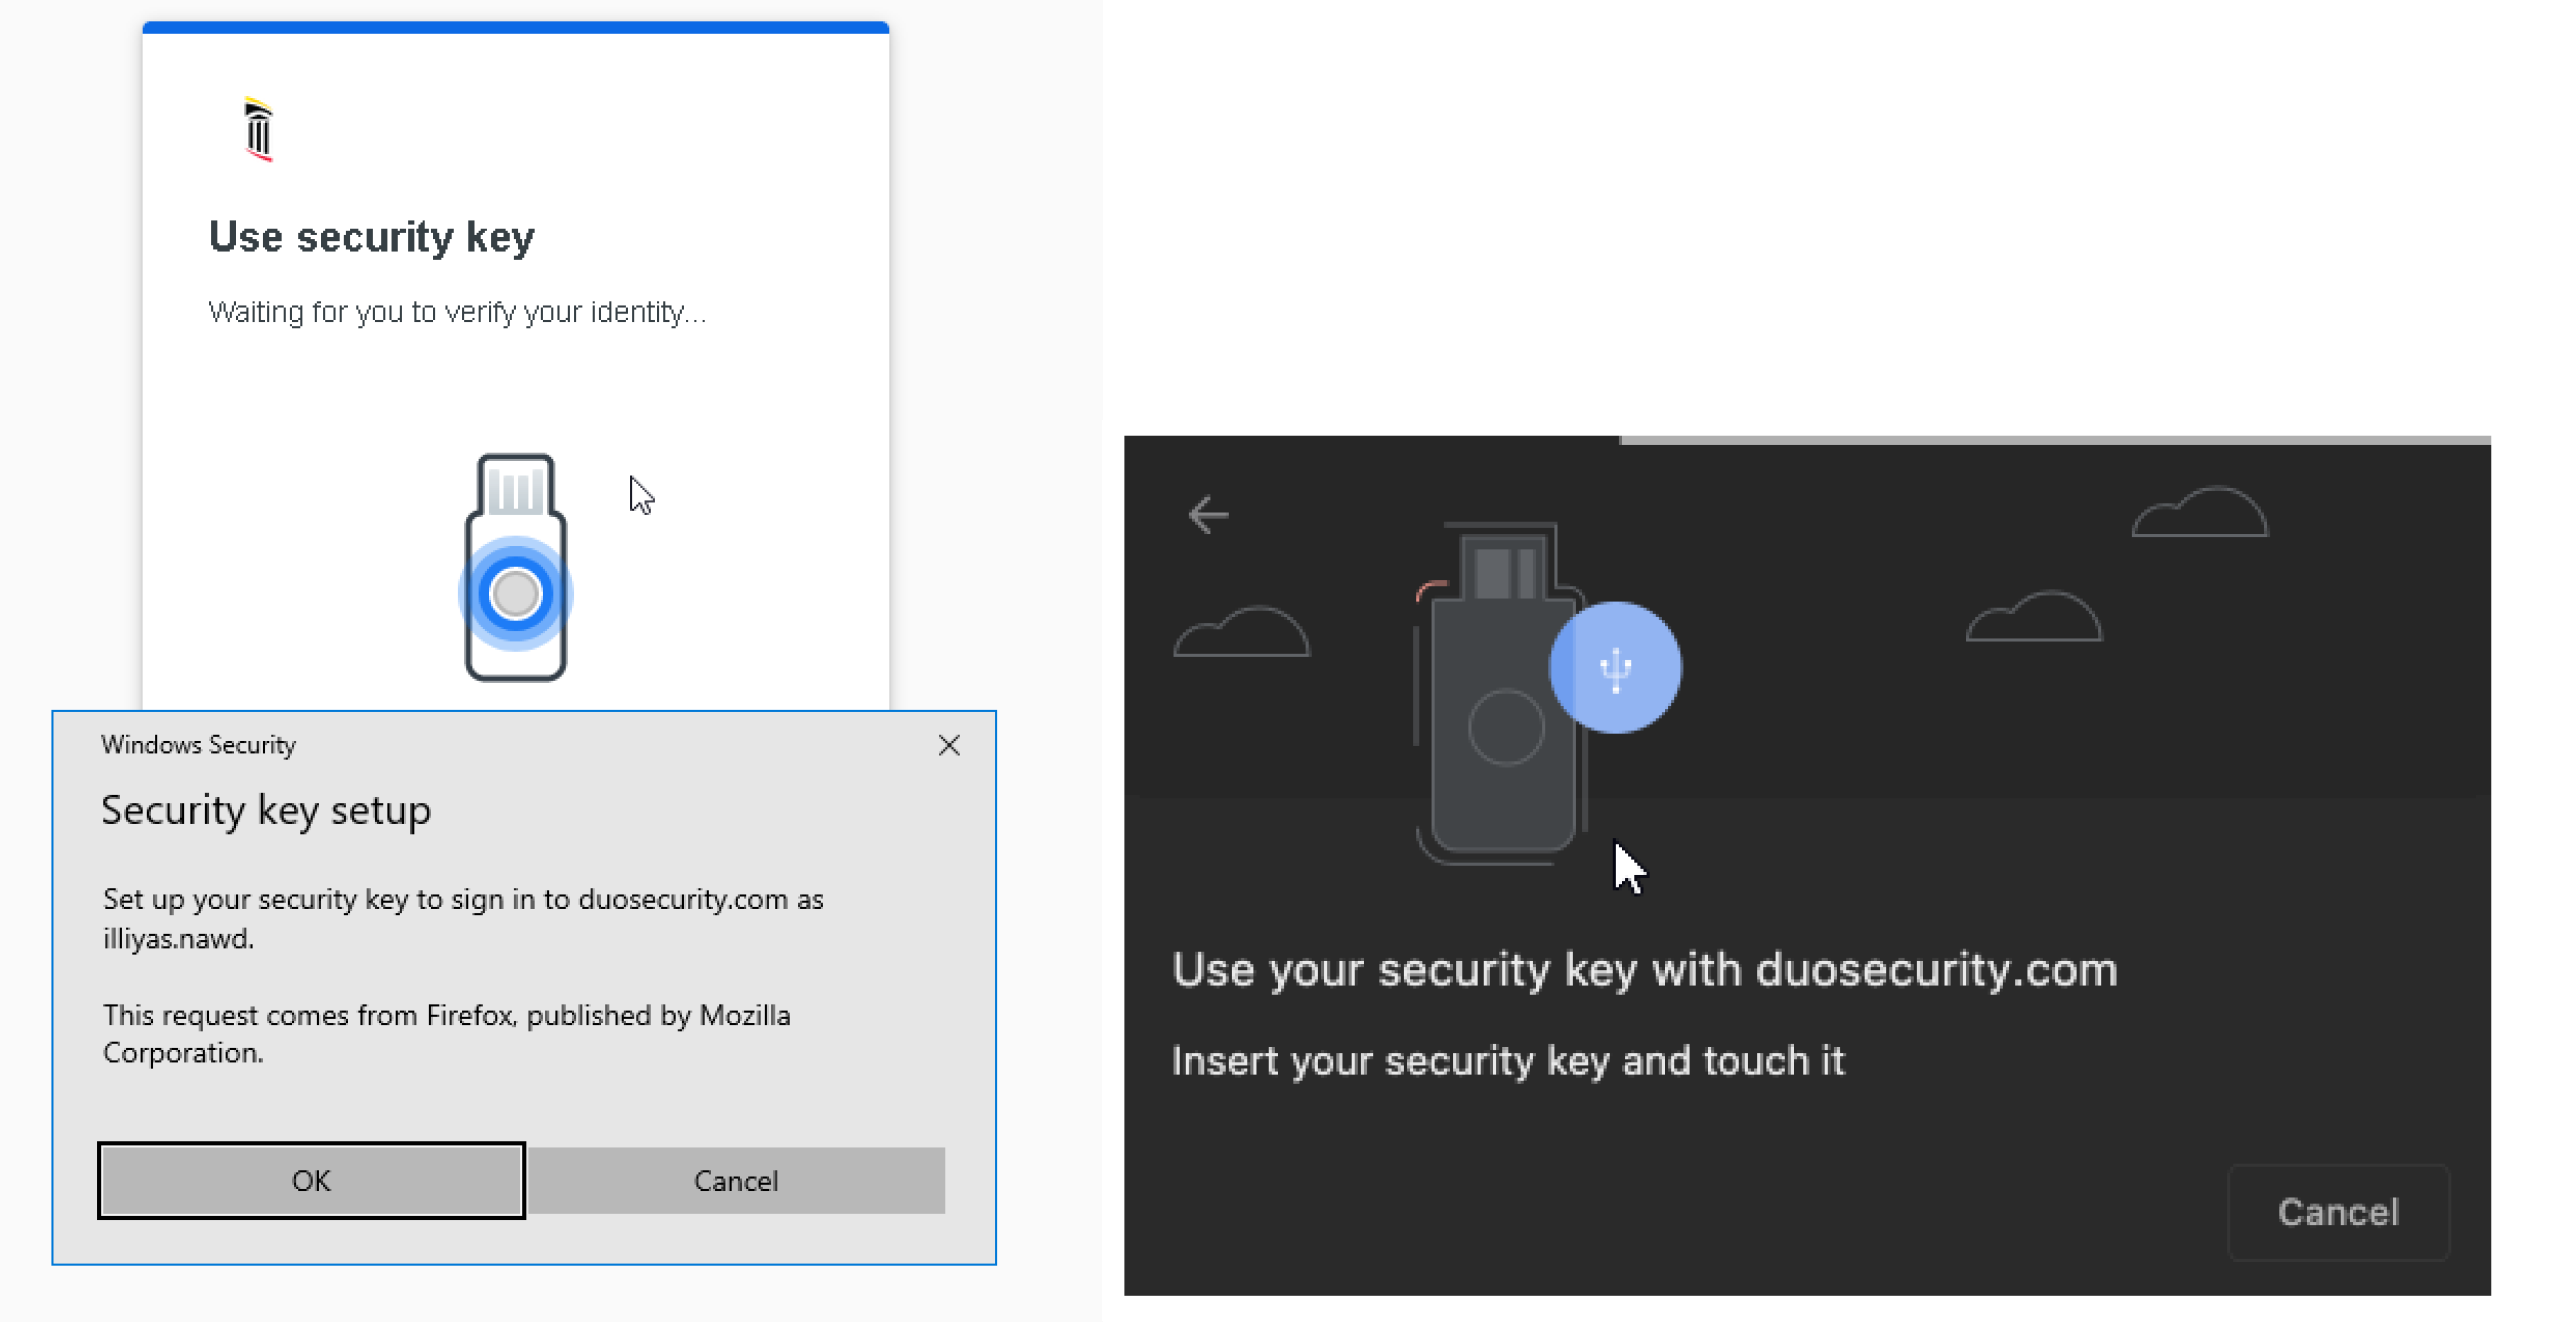 DUO Use Security key